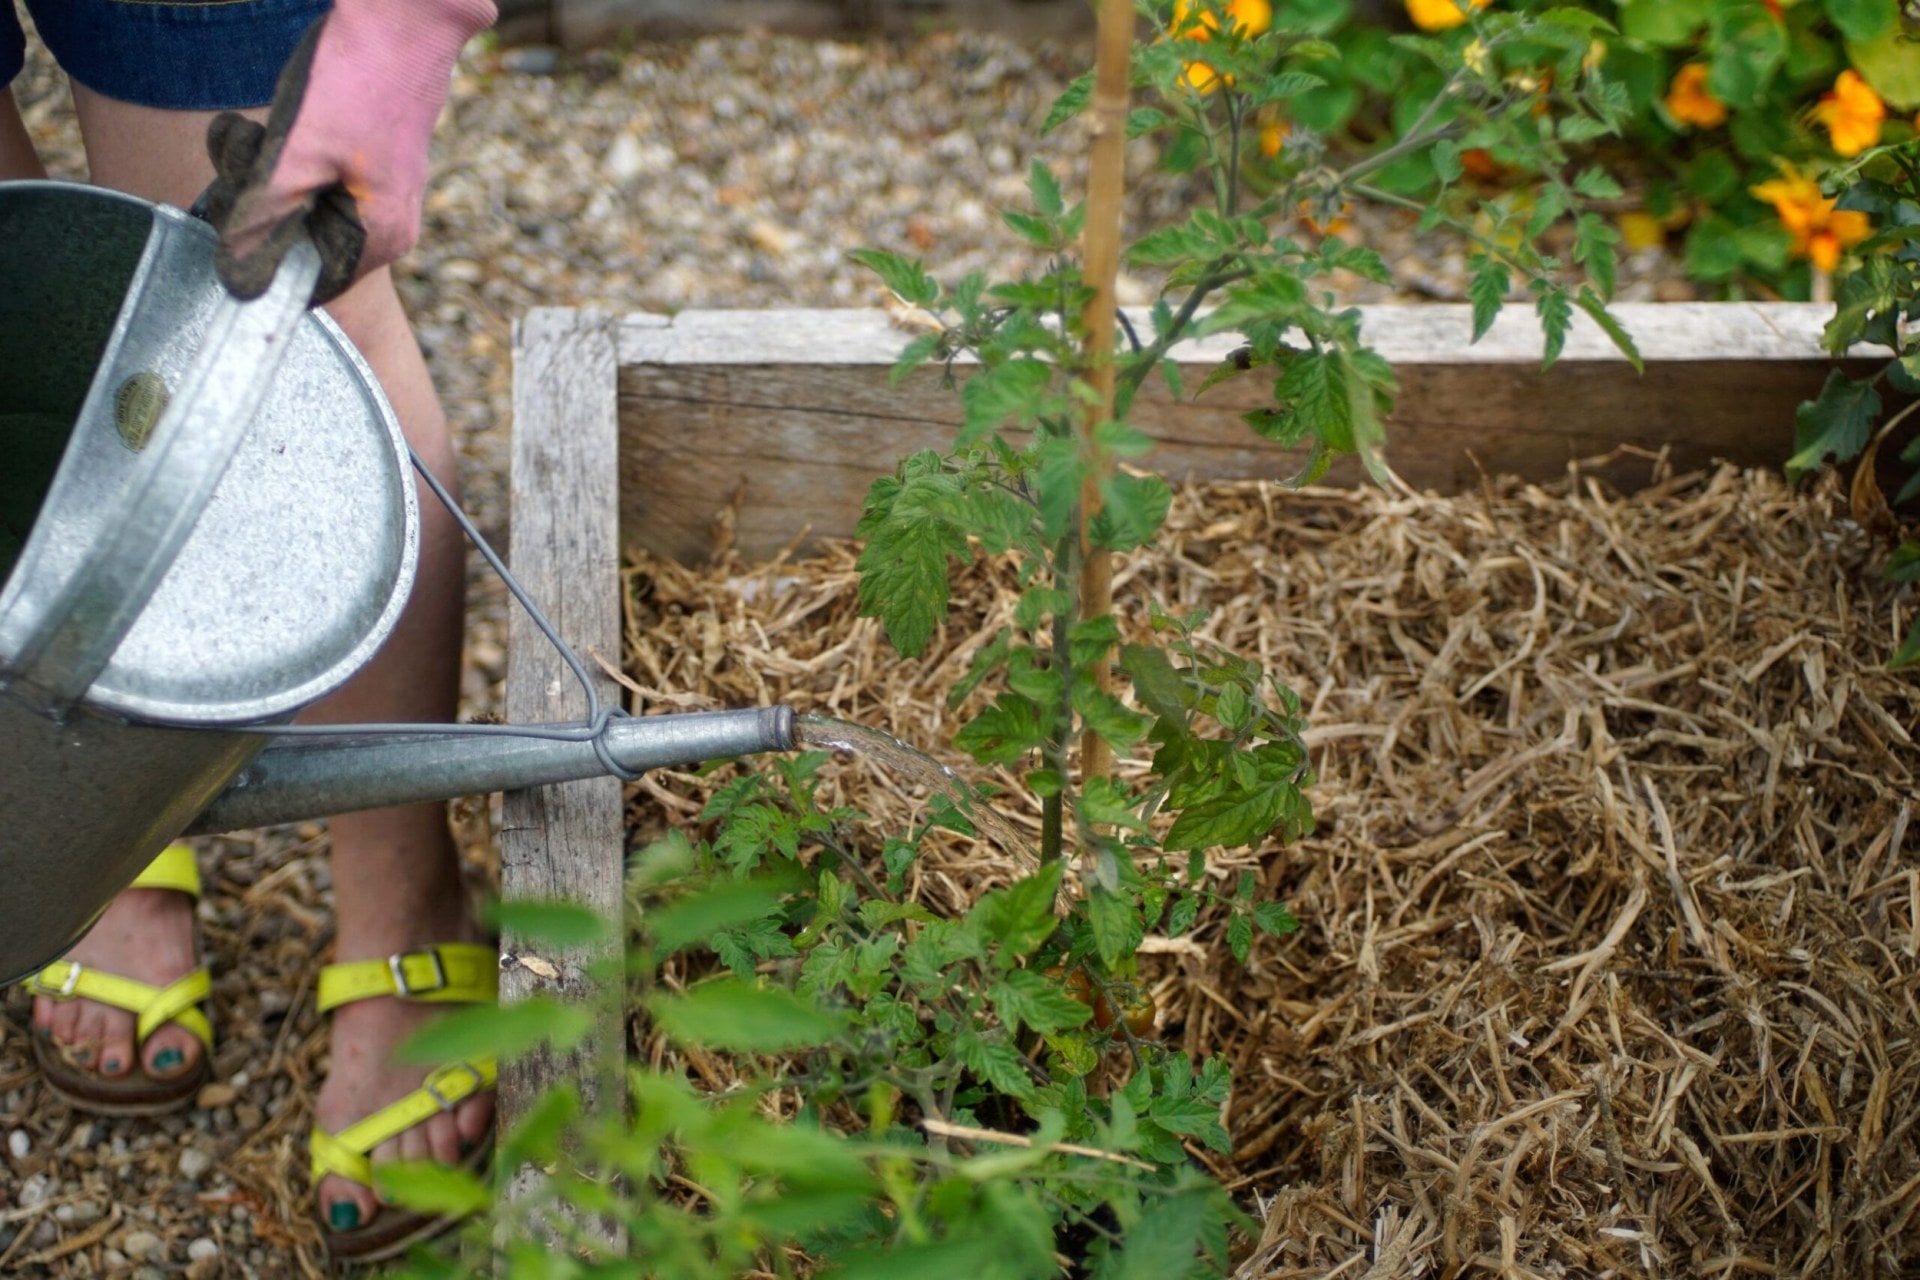 A garden bed using pea straw as mulch, a person watering the plant growing in the bed